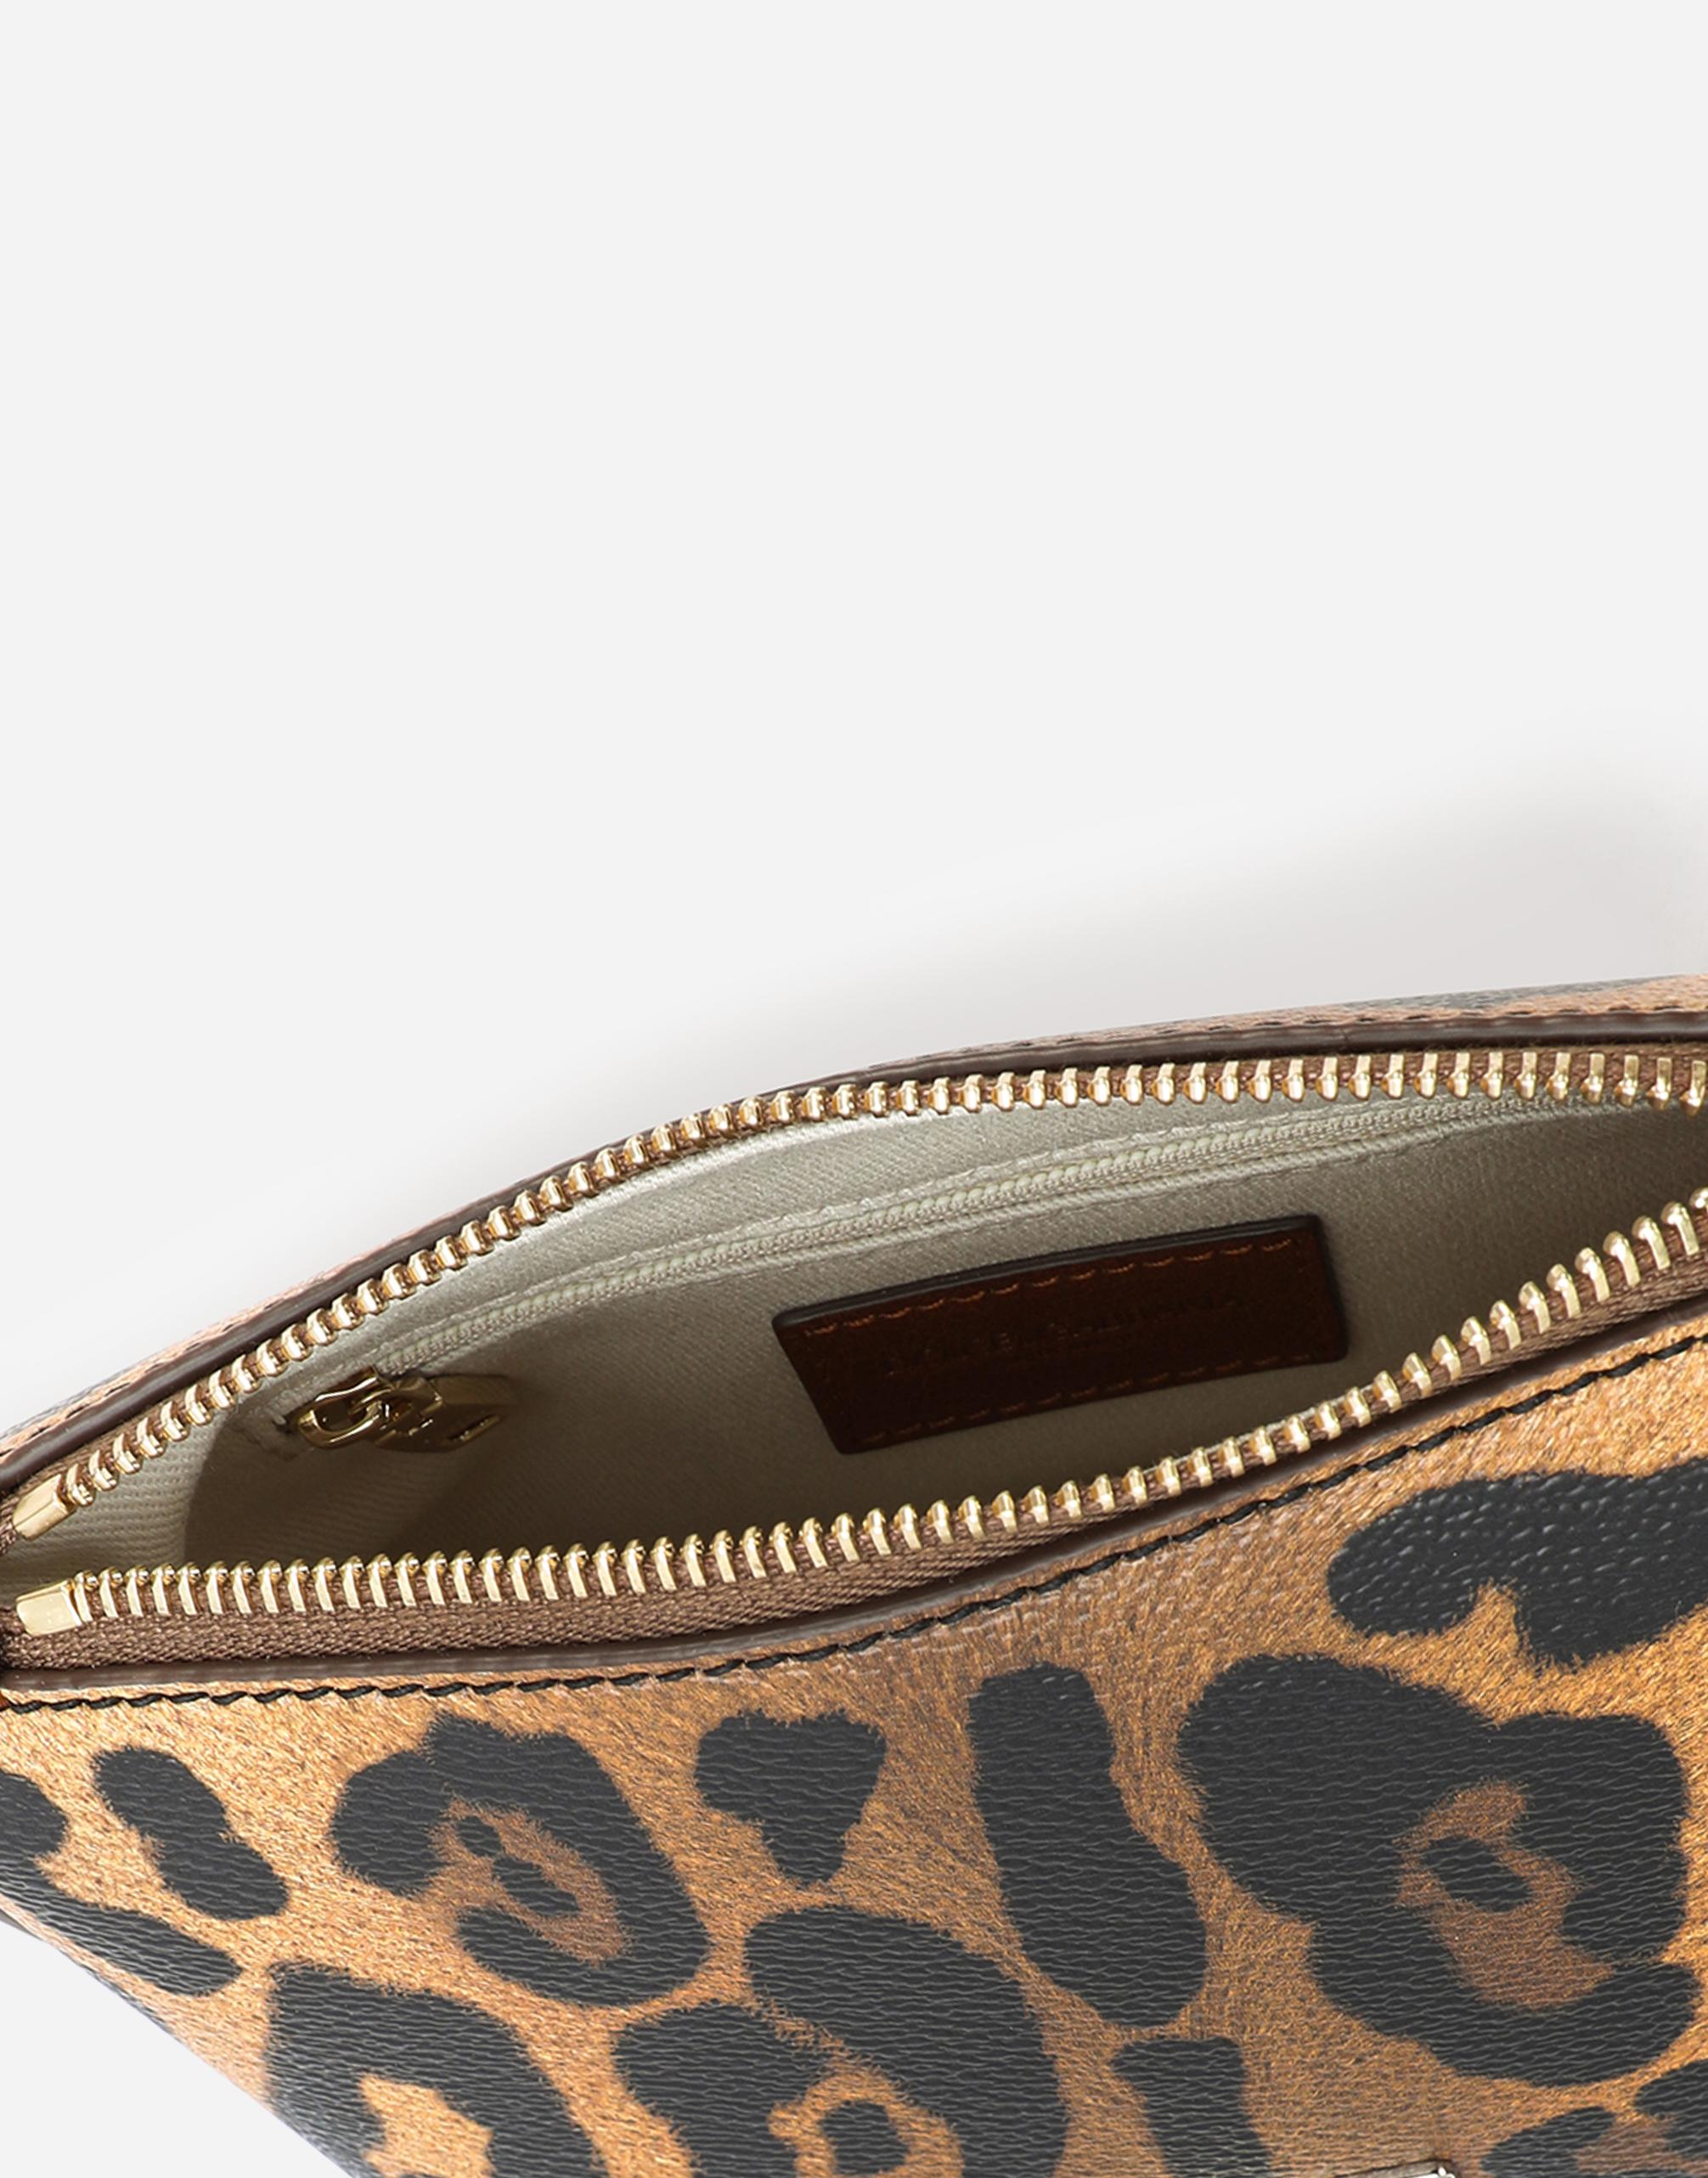 Medium travel bag in leopard-print Crespo with branded plate in Multicolor